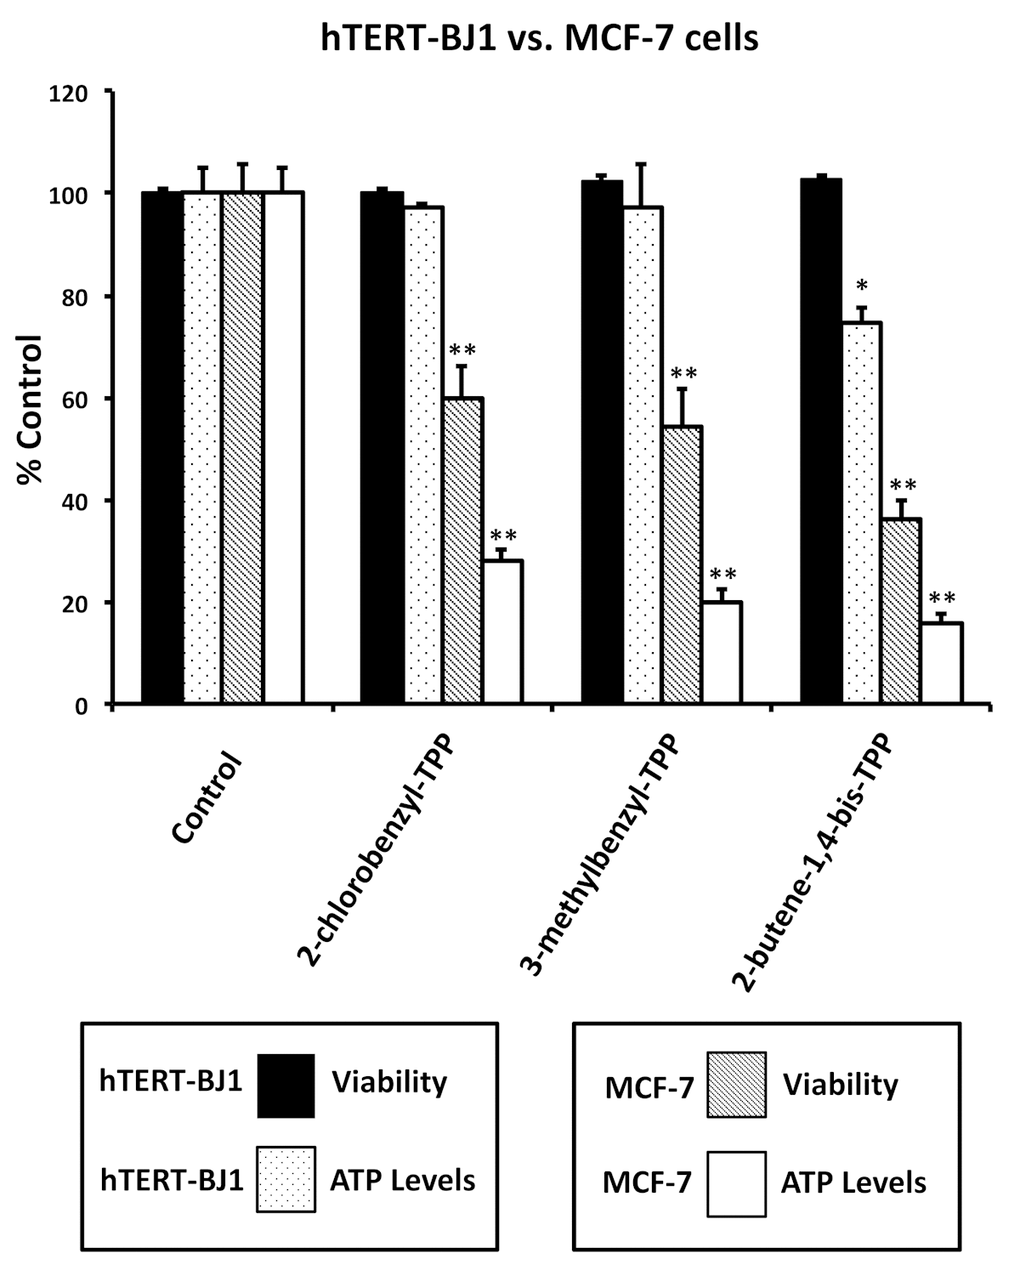 Effects of TPP derivatives on cell viability and intracellular ATP levels in normal fibroblasts (hTERT-BJ1) and human breast cancer cells (MCF-7). Cell viability and intracellular ATP levels were determined in the same treated samples. Hoechst staining (%) of hTERT-BJ1 human fibroblasts (black); ATP level (%) of hTERT-BJ1 human fibroblasts (dotted); Hoechst staining (%) of MCF-7 cells (inclined lines); ATP level (%) of of MCF-7 cells (white). TPP treatments at 1 µM, 72h. Data are represented as mean +/- SEM. *p 